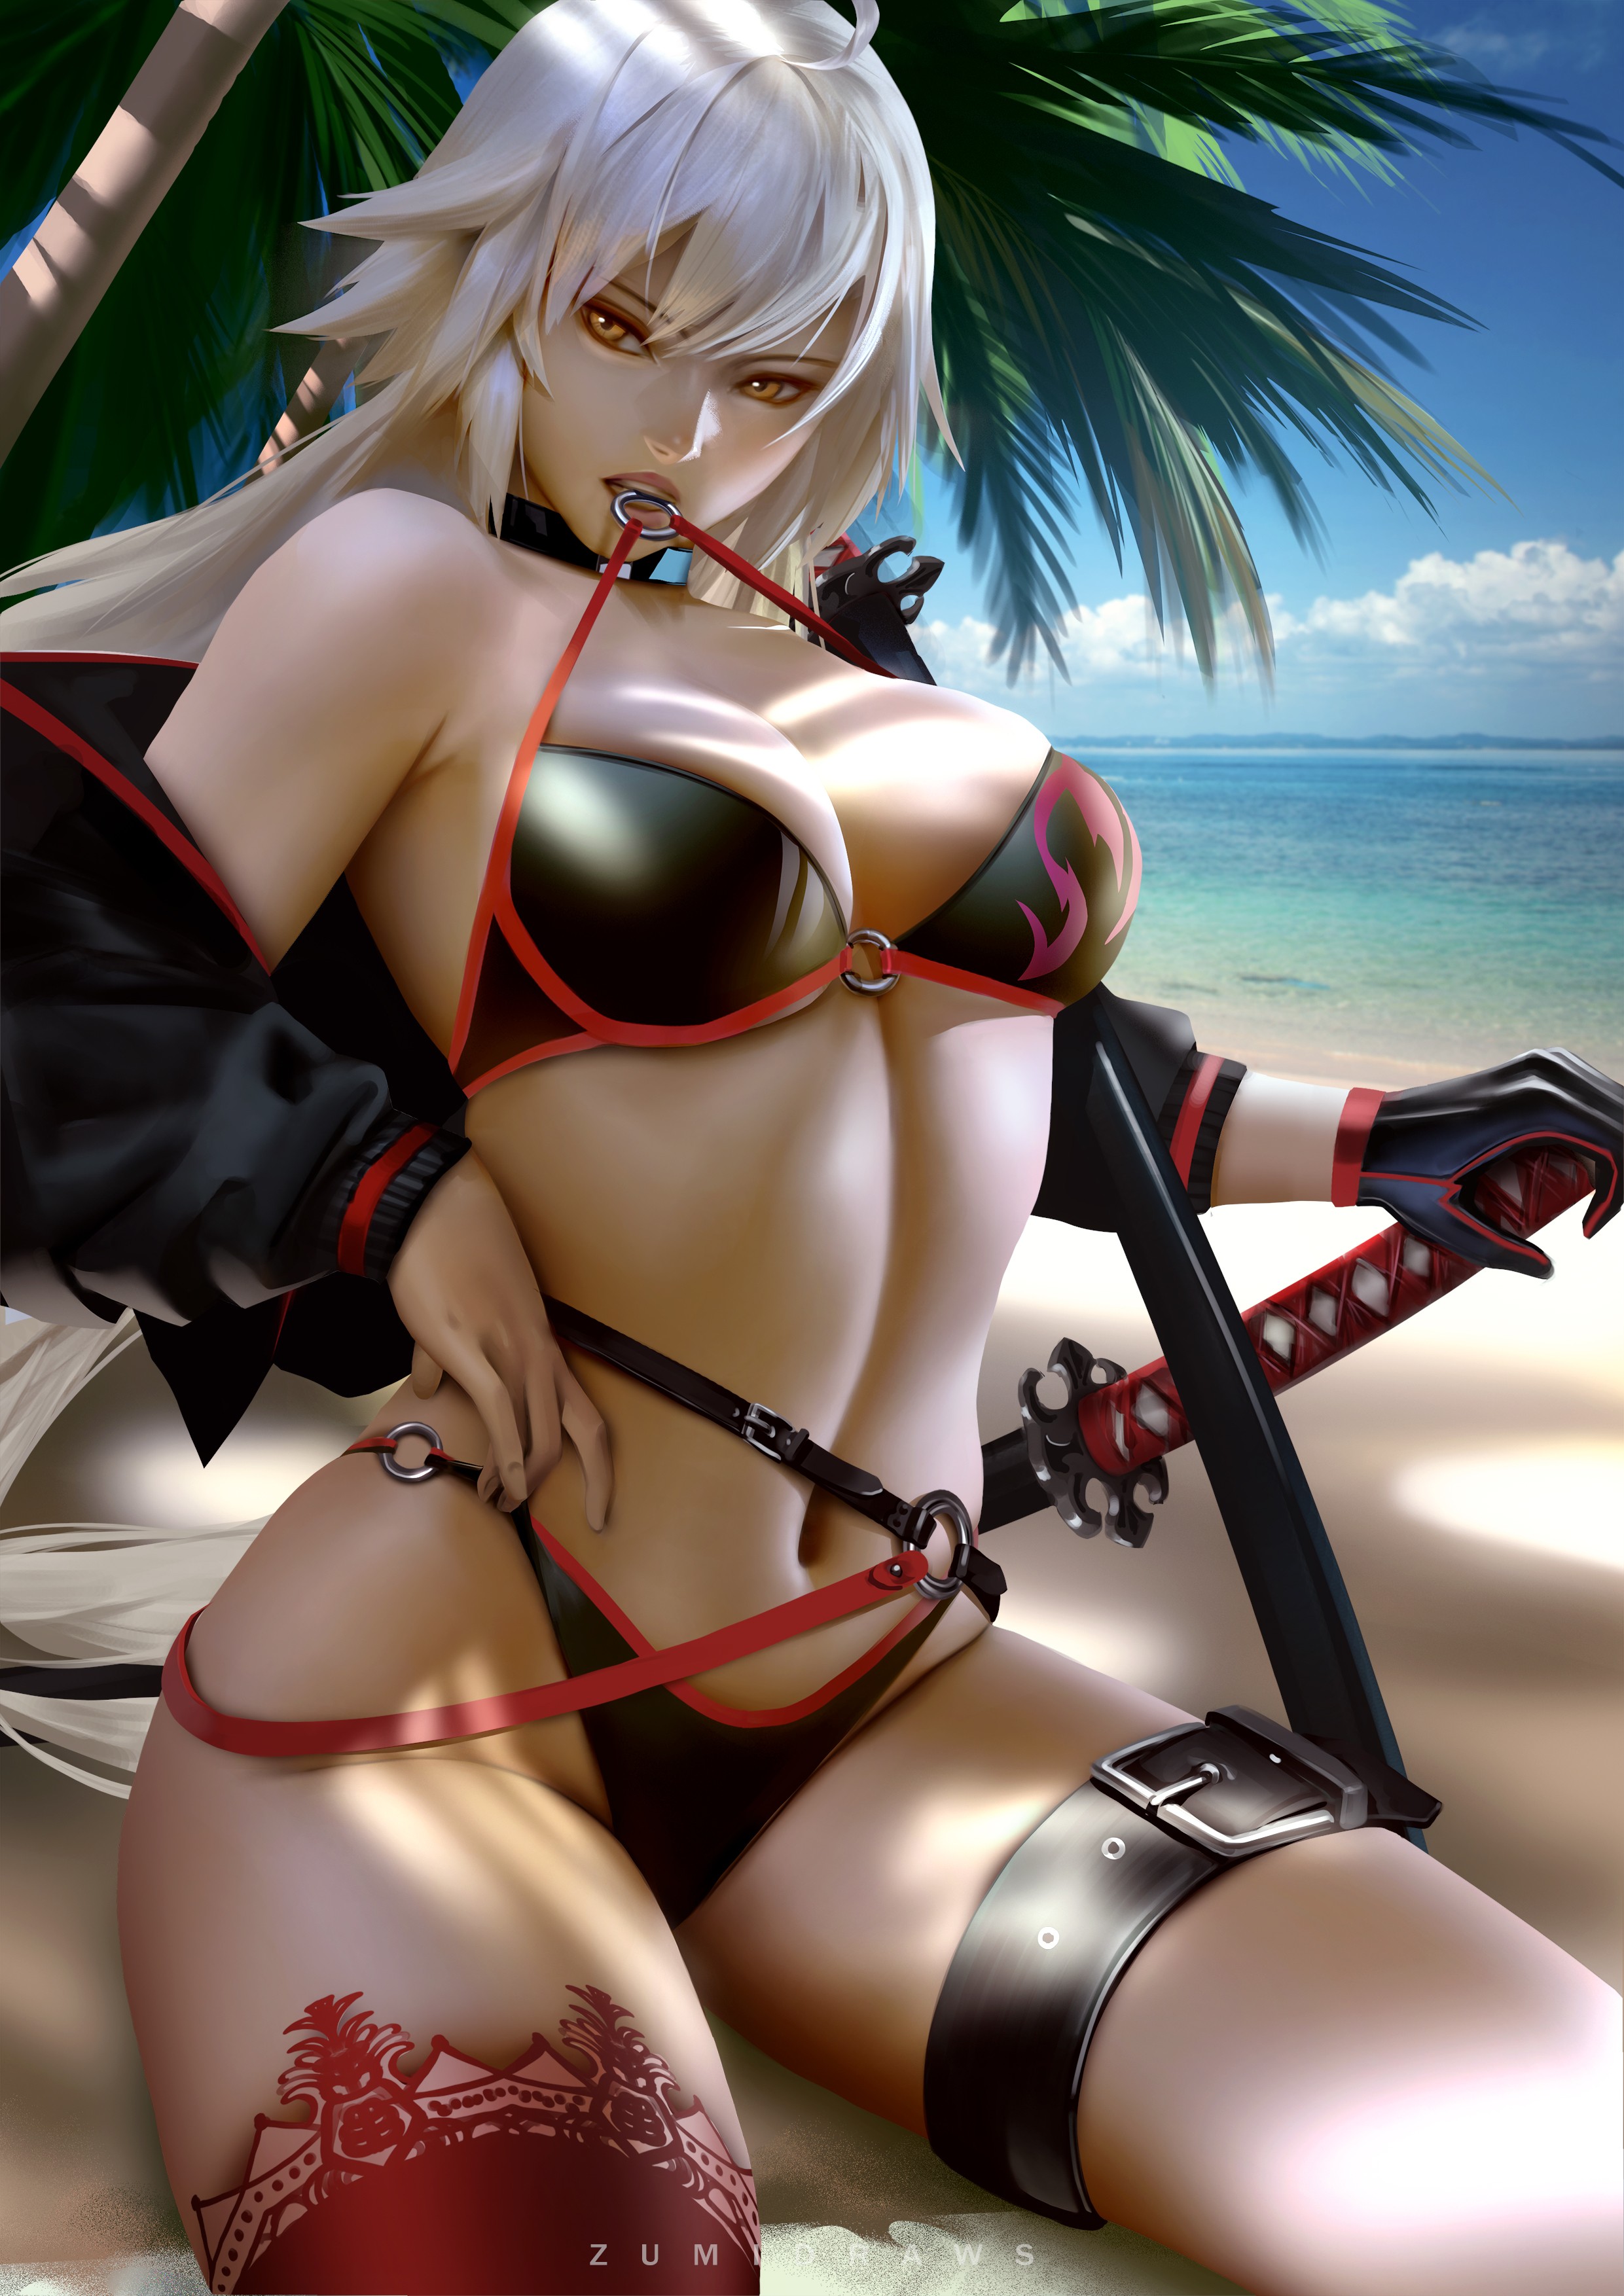 Anime 2481x3508 Zumi beach Jeanne (Alter) (Fate/Grand Order) Jeanne d'Arc (Fate) Fate series big boobs bikini cleavage palm trees pulling clothing white hair yellow eyes curvy open clothes weapon sword